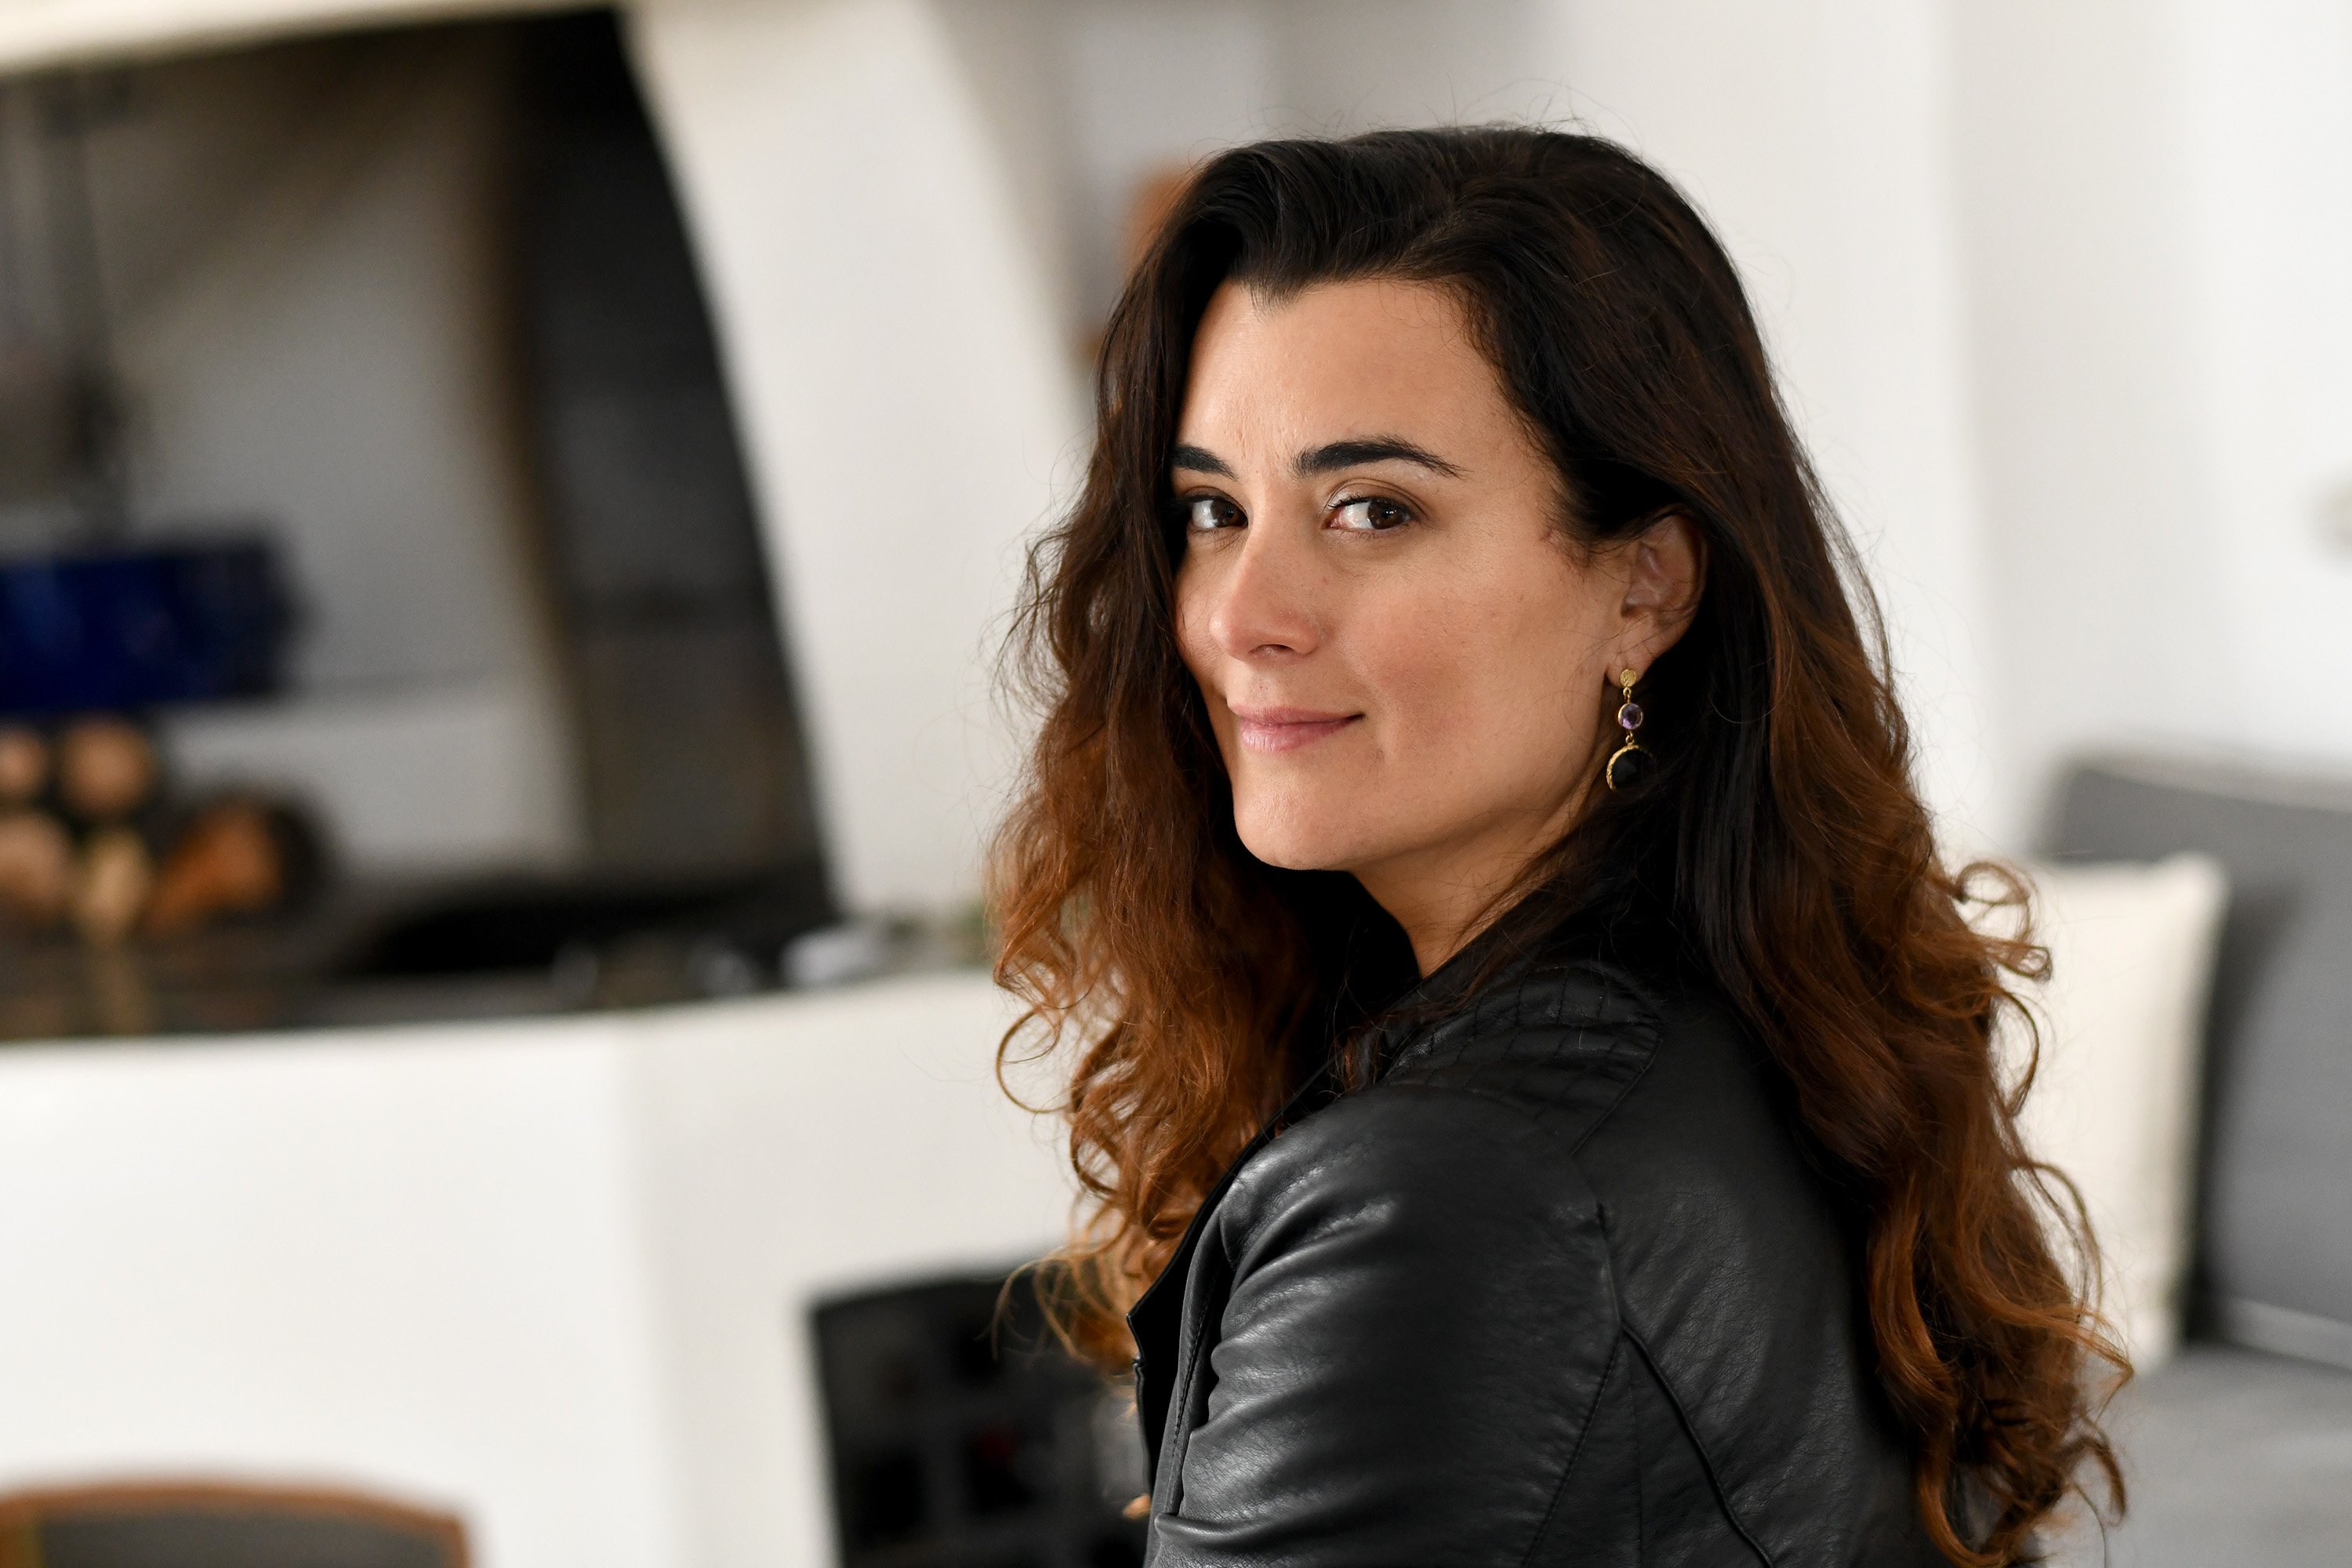 Cote De Pablo poses for a portrait session during the Riviera International Film Festival on May 2, 2018 | Photo: GettyImages